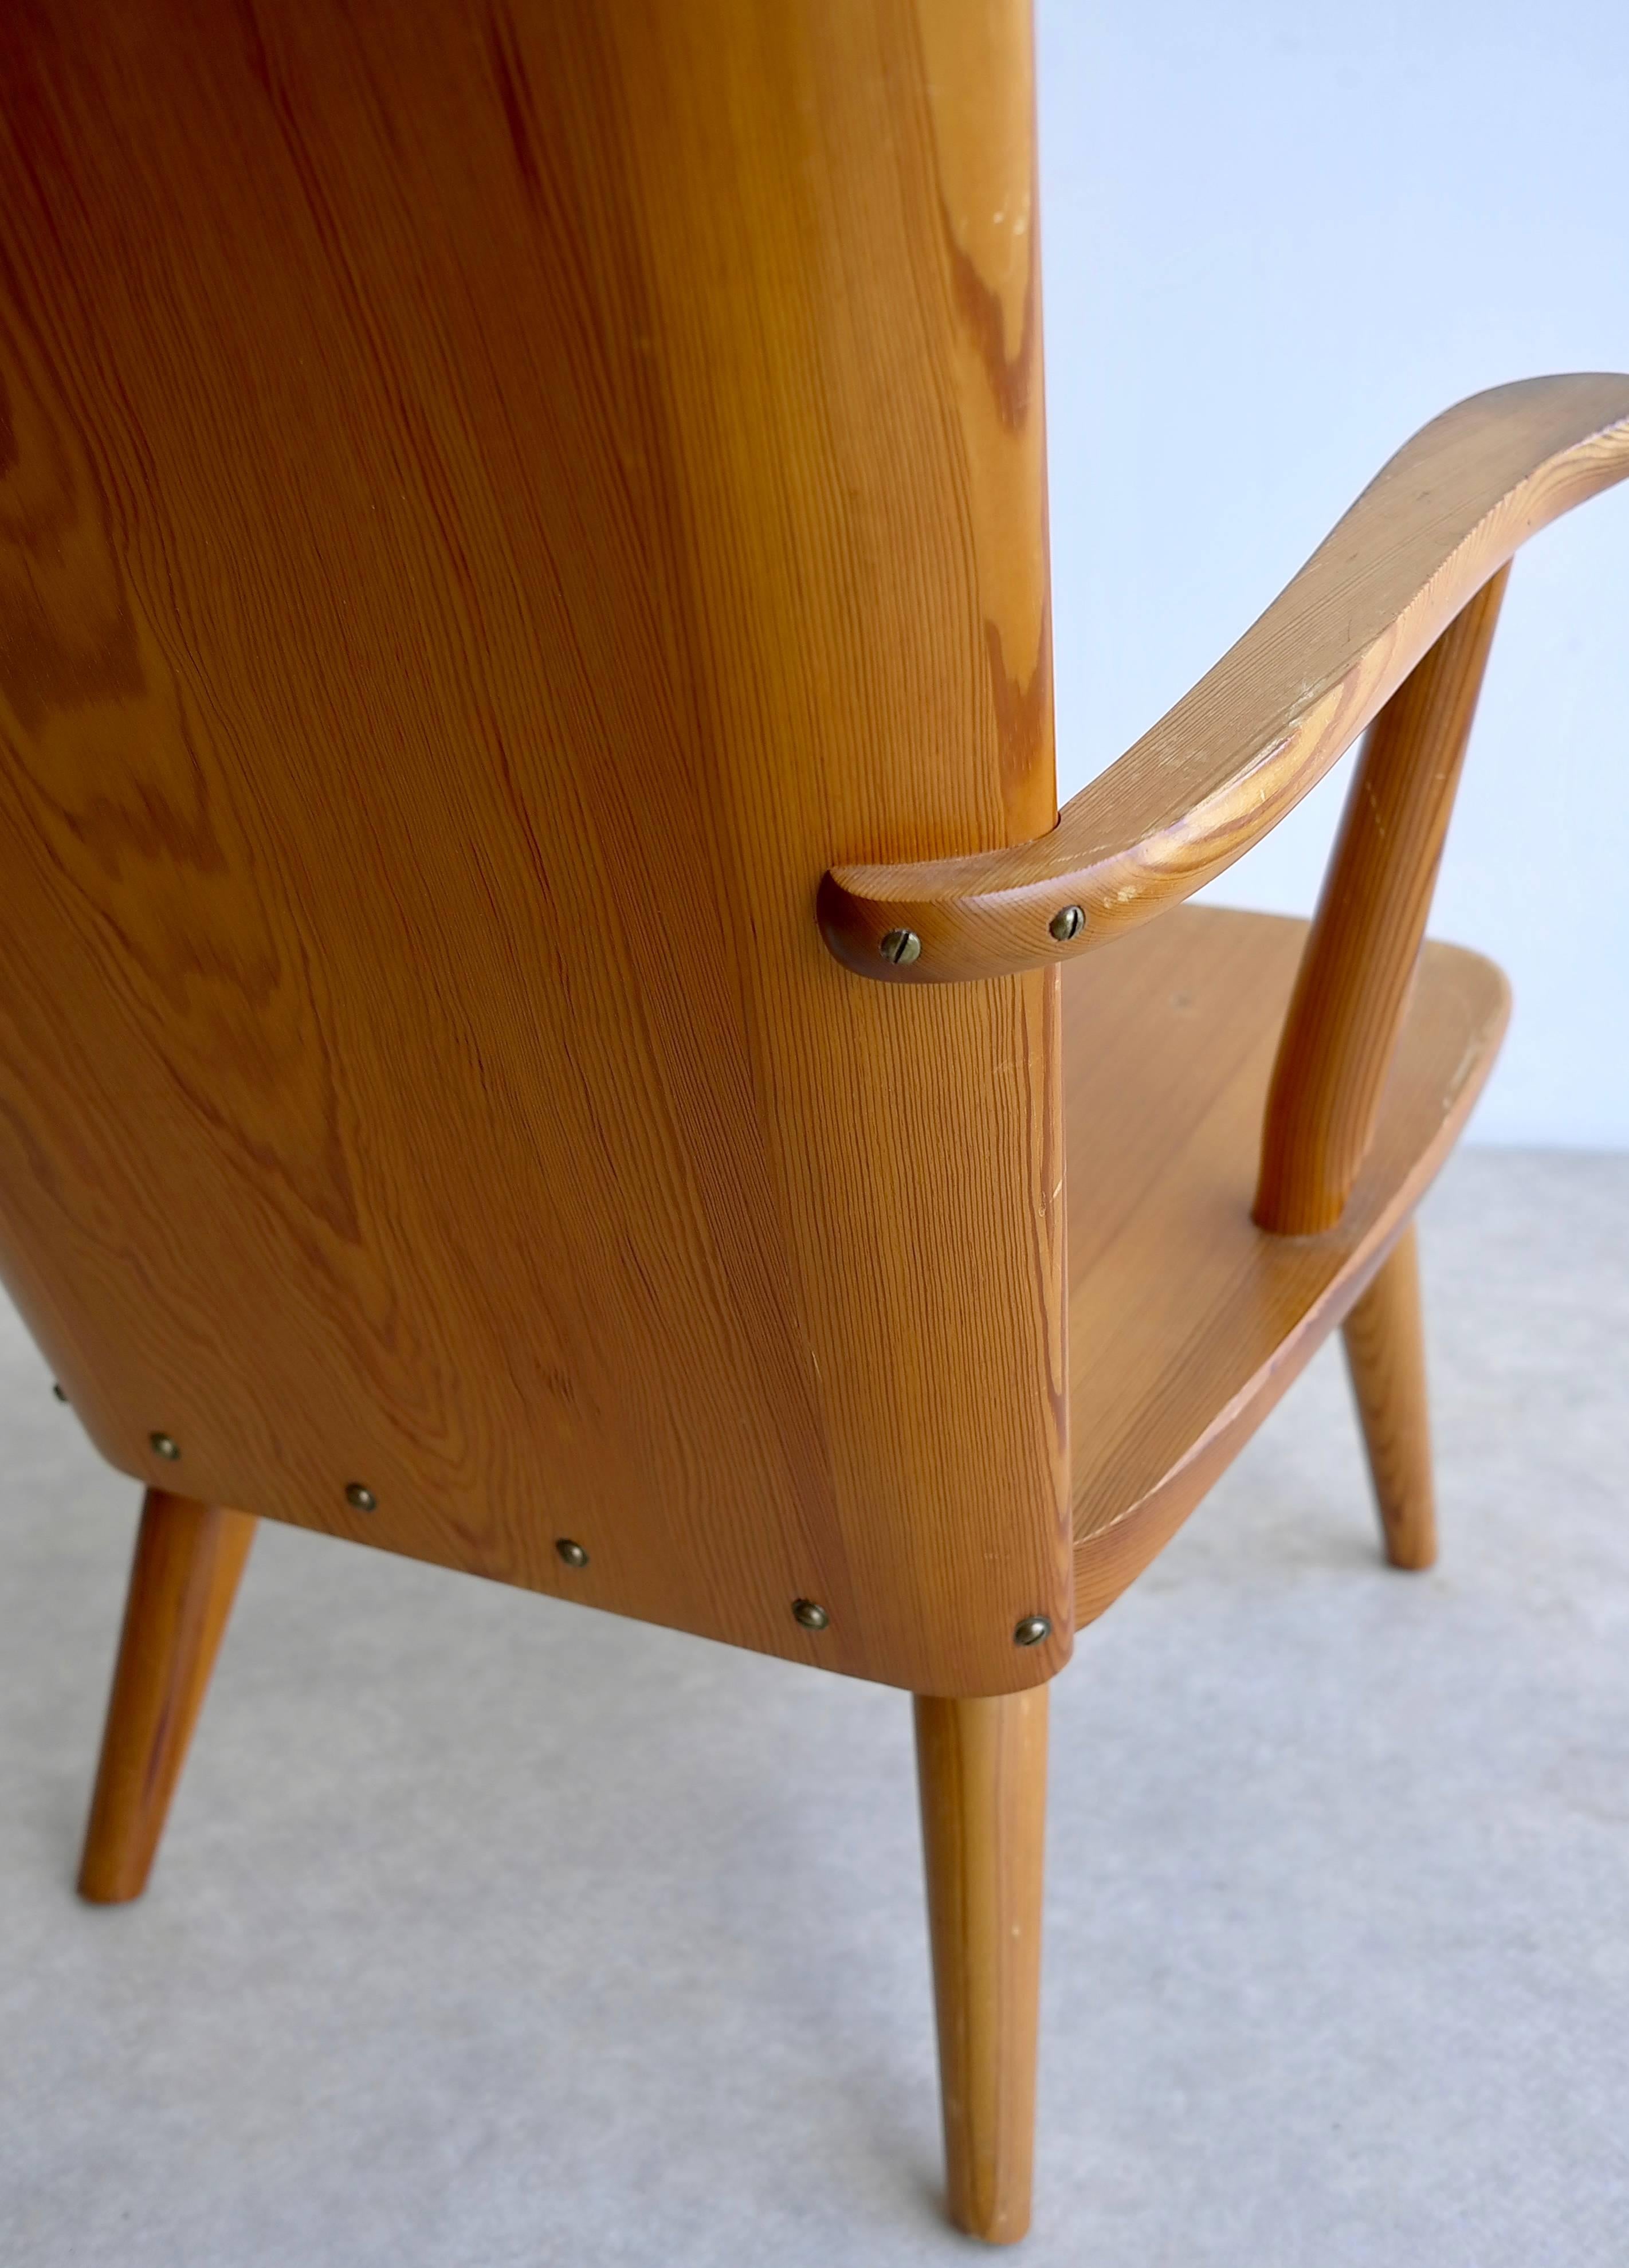 Rare Swedish Armchair in Pine by Goran Malmvall voor Svensk Fur, 1940s For Sale 1